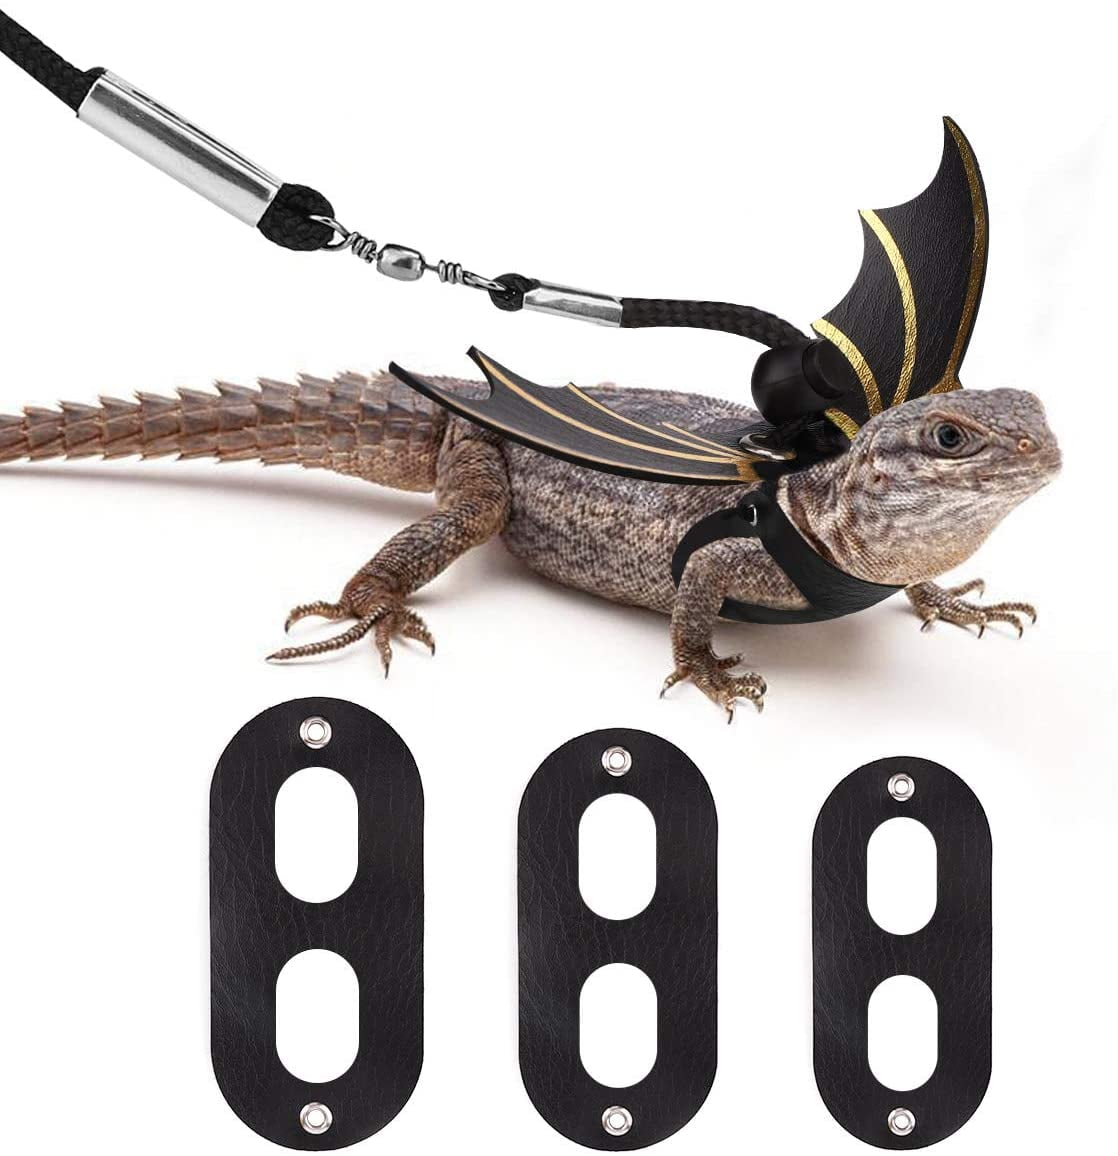 Black 3 Size Pack Leather Wing Lizard Harness with Removable Lizard Leash for Bearded Dragon Lizard Reptiles Bearded Dragon Leash Harness 